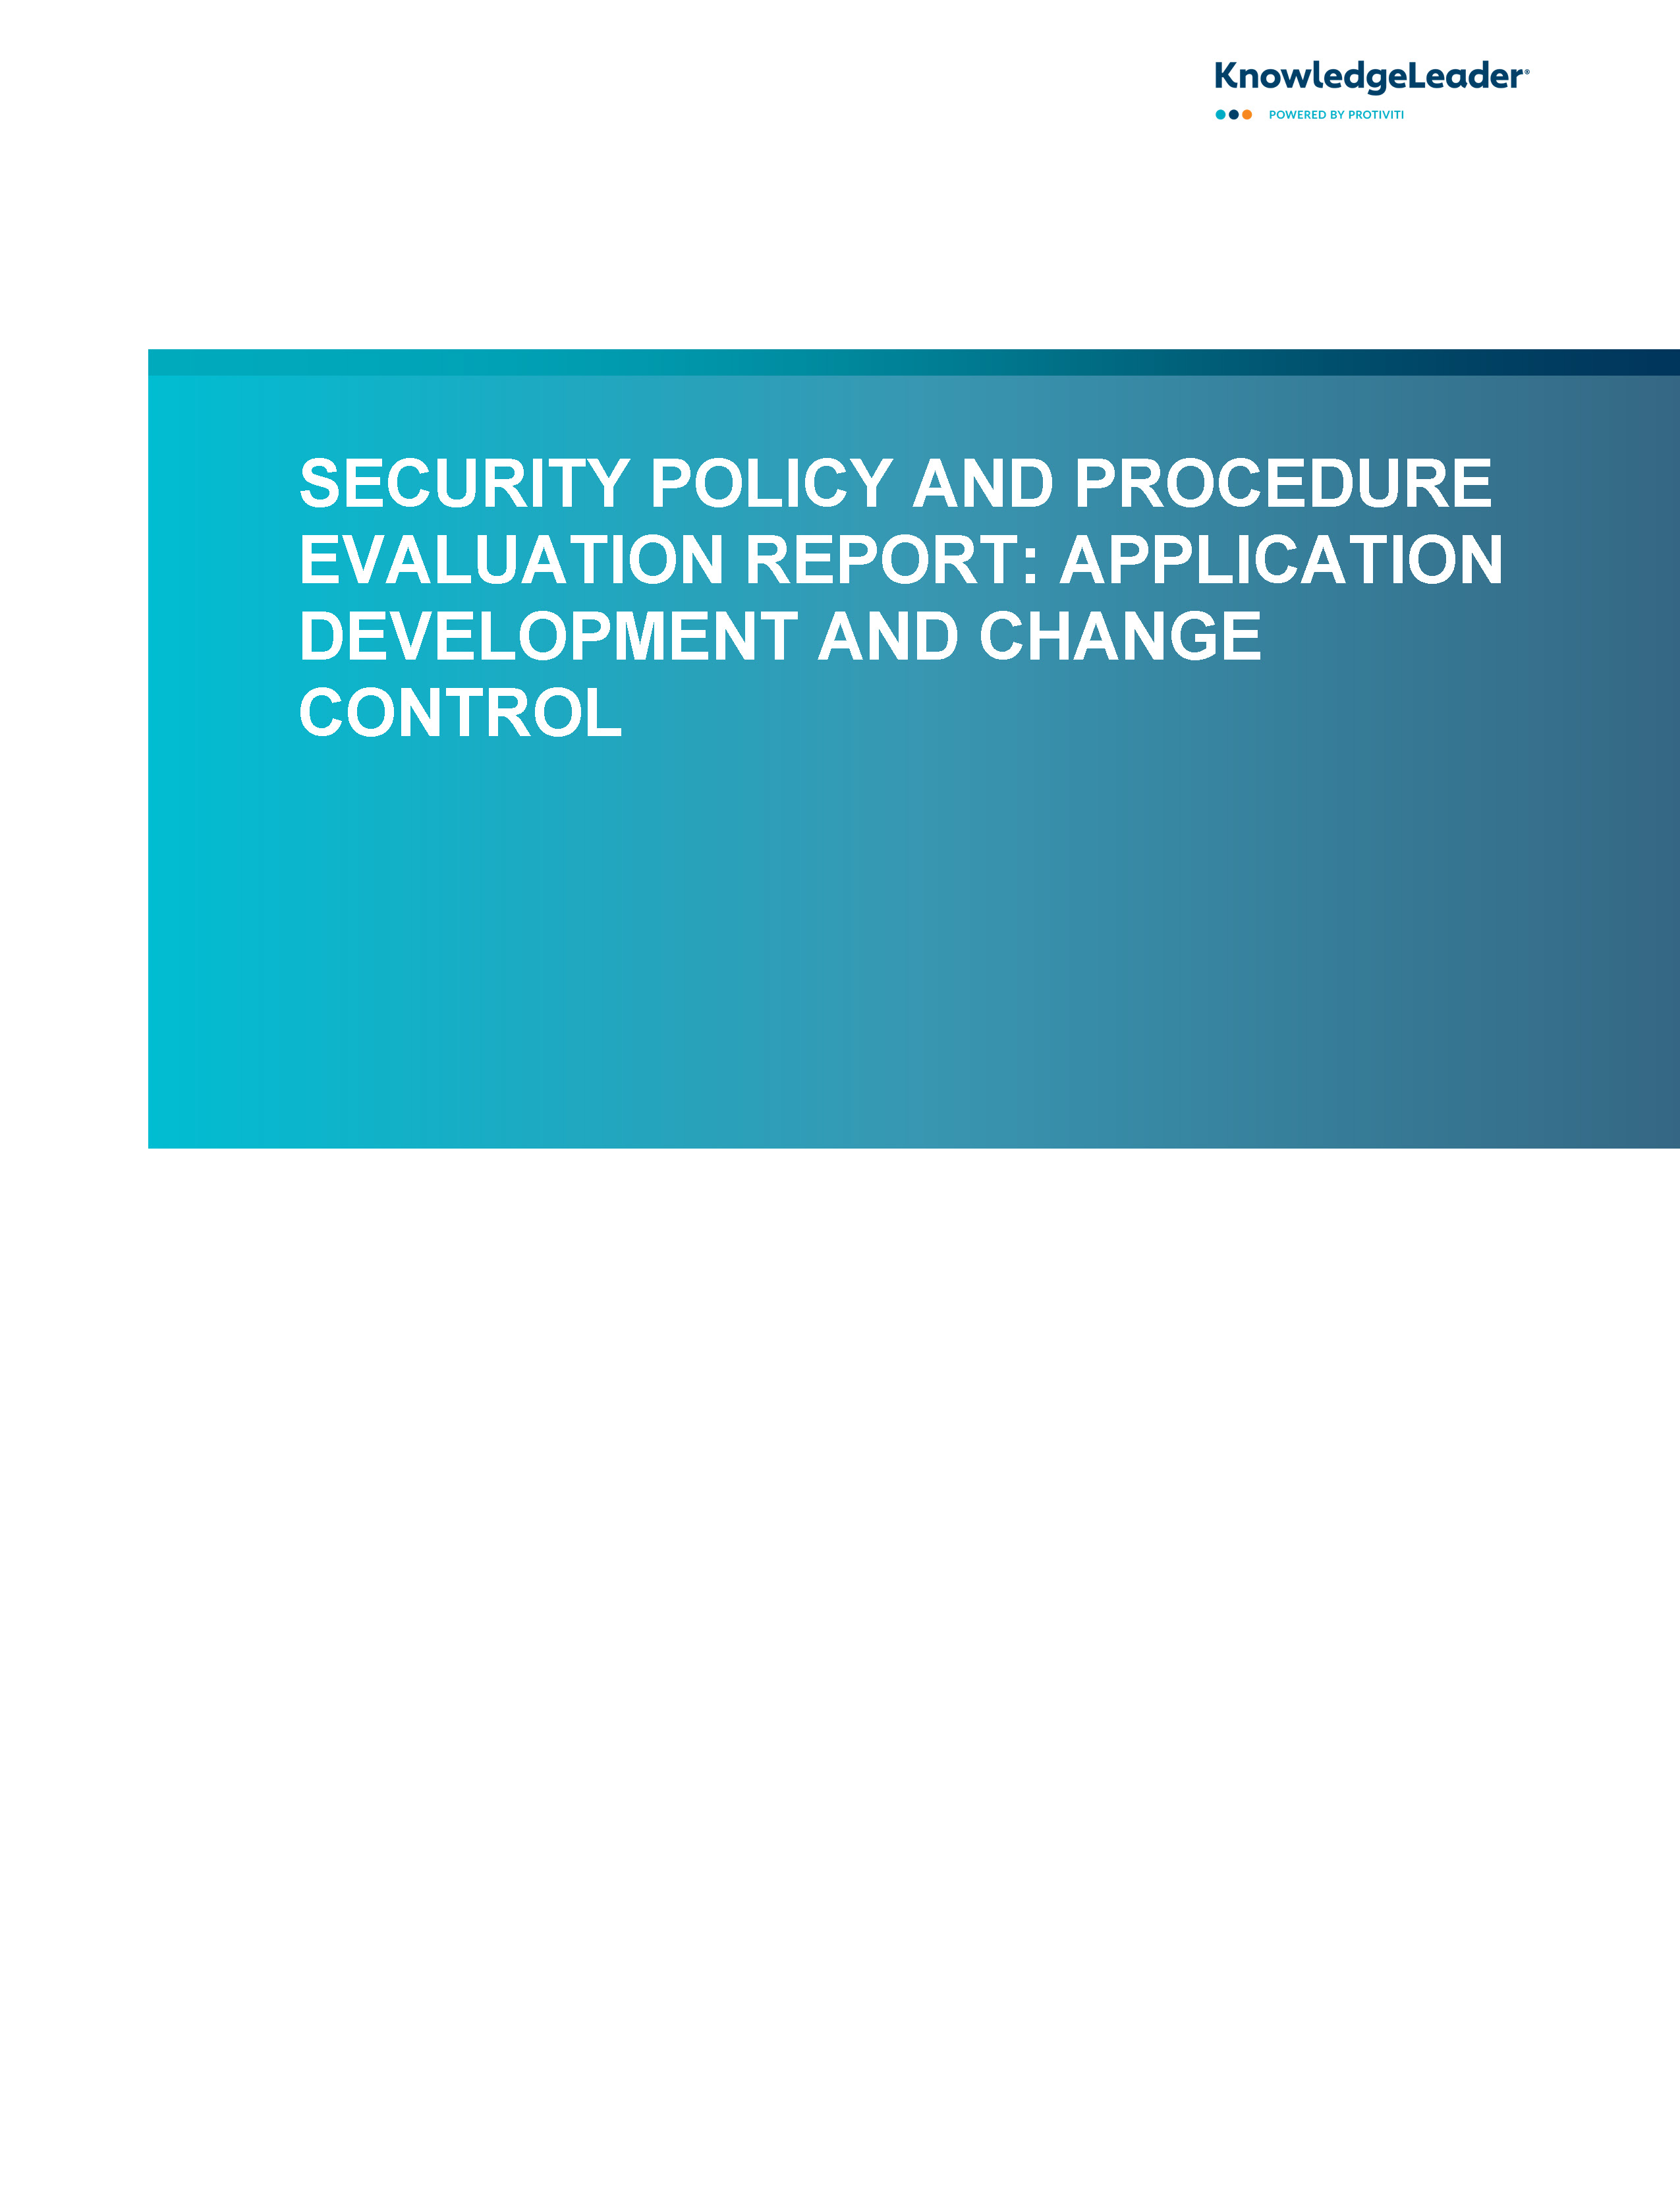 screenshot of the first page of Security Policy and Procedure Evaluation Report: Application Development and Change Control